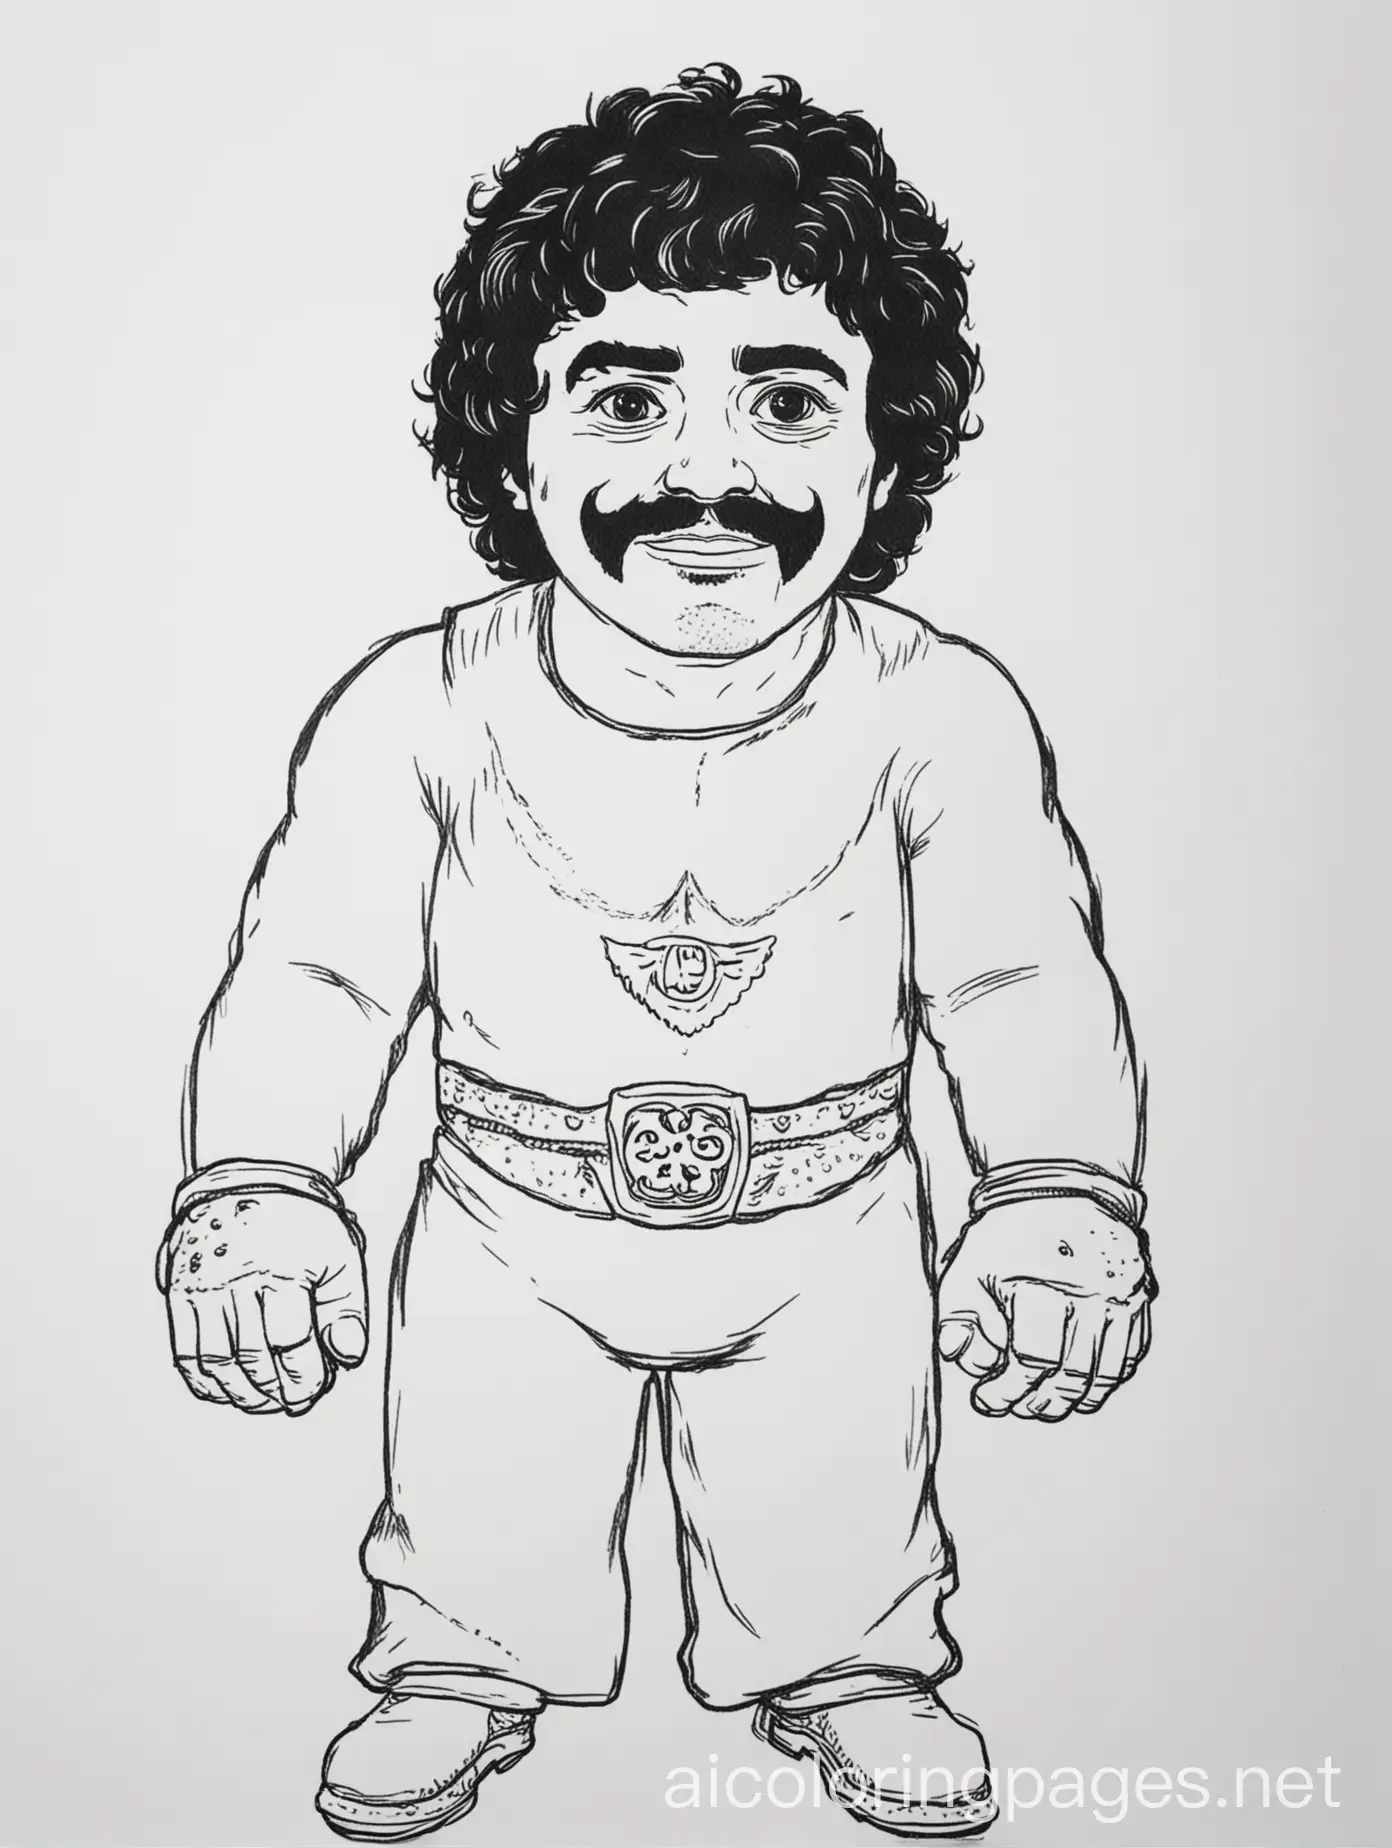 Coloring-Page-of-Nacho-Libre-Black-and-White-Line-Art-on-White-Background